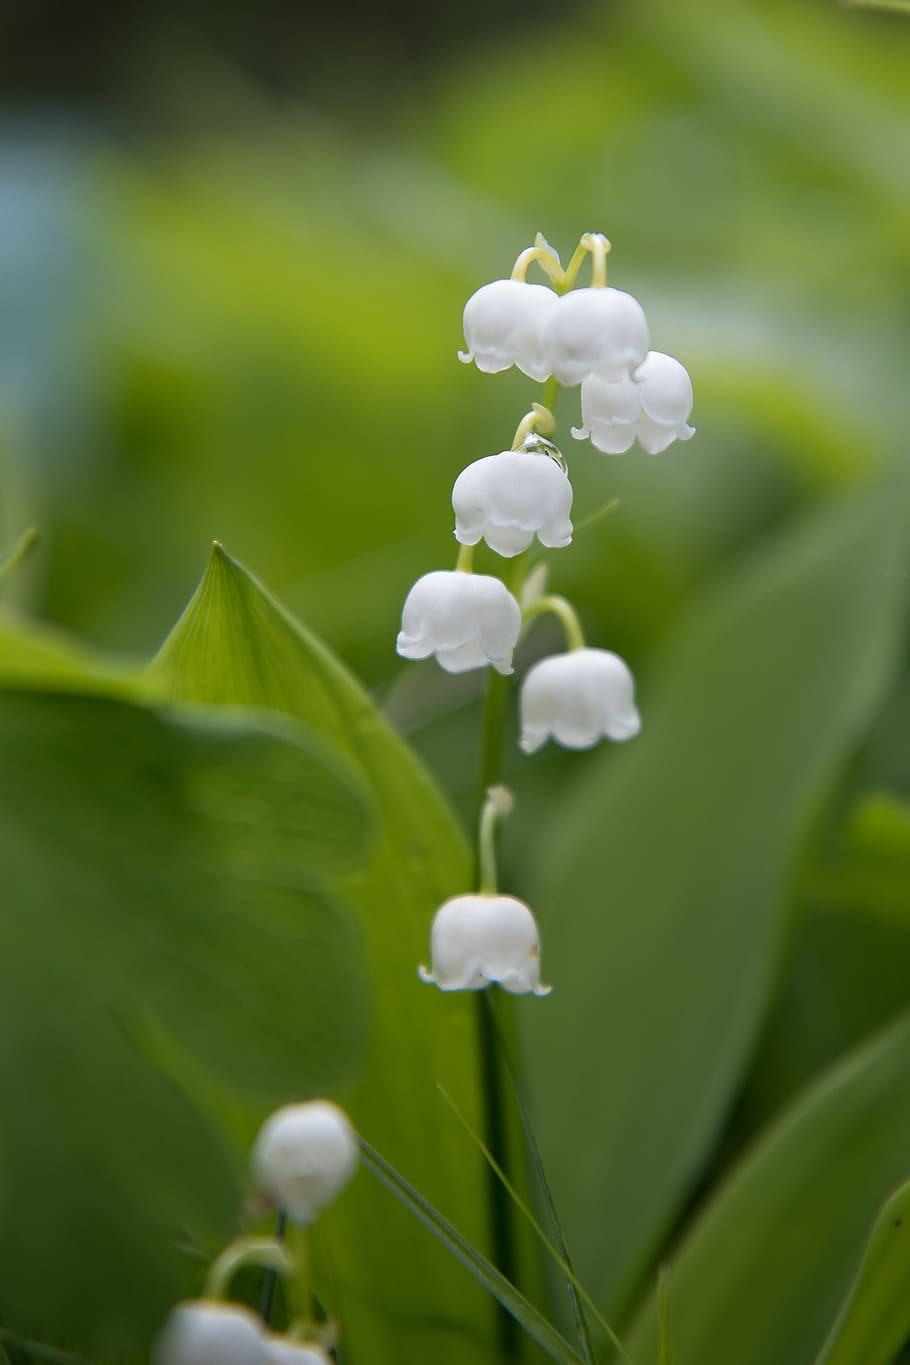 lily of the valley, flower, spring, blossom, bloom, nature, flora, green, may, flowering plant